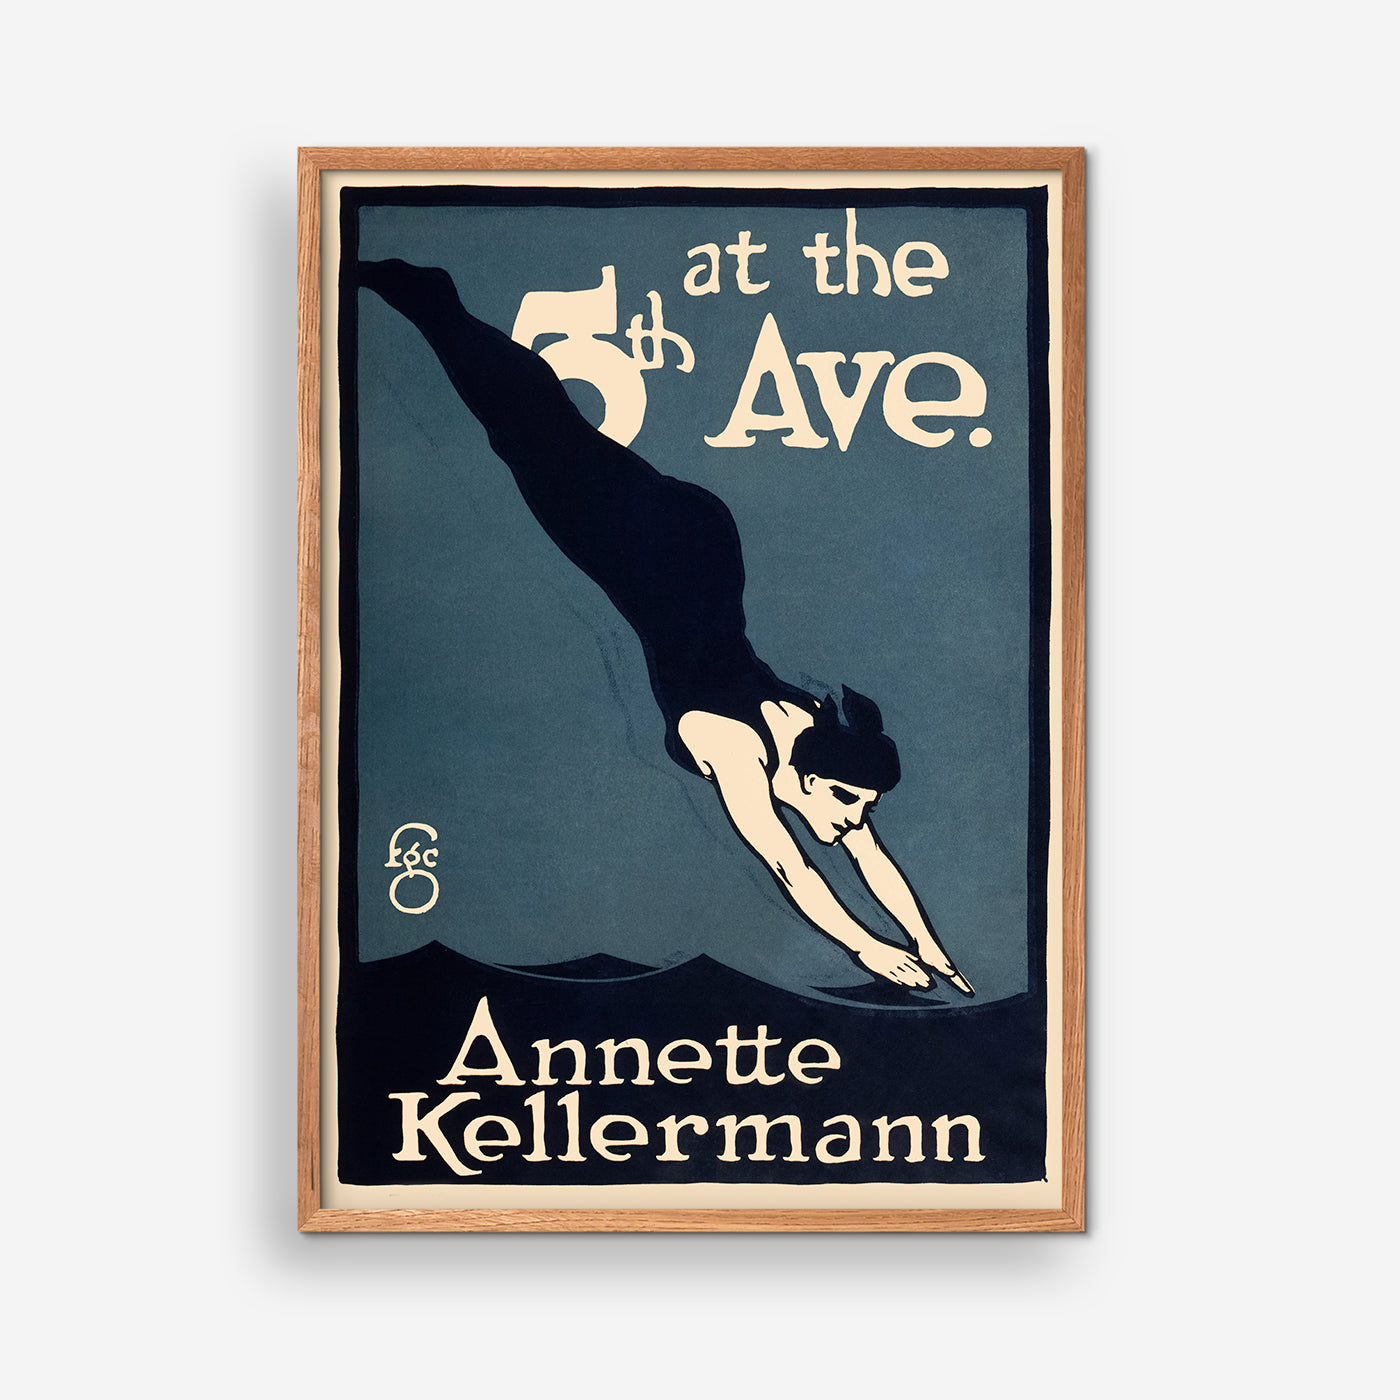 Annette Kellermann at the 5th Ave., 1910 - Frederic G. Cooper